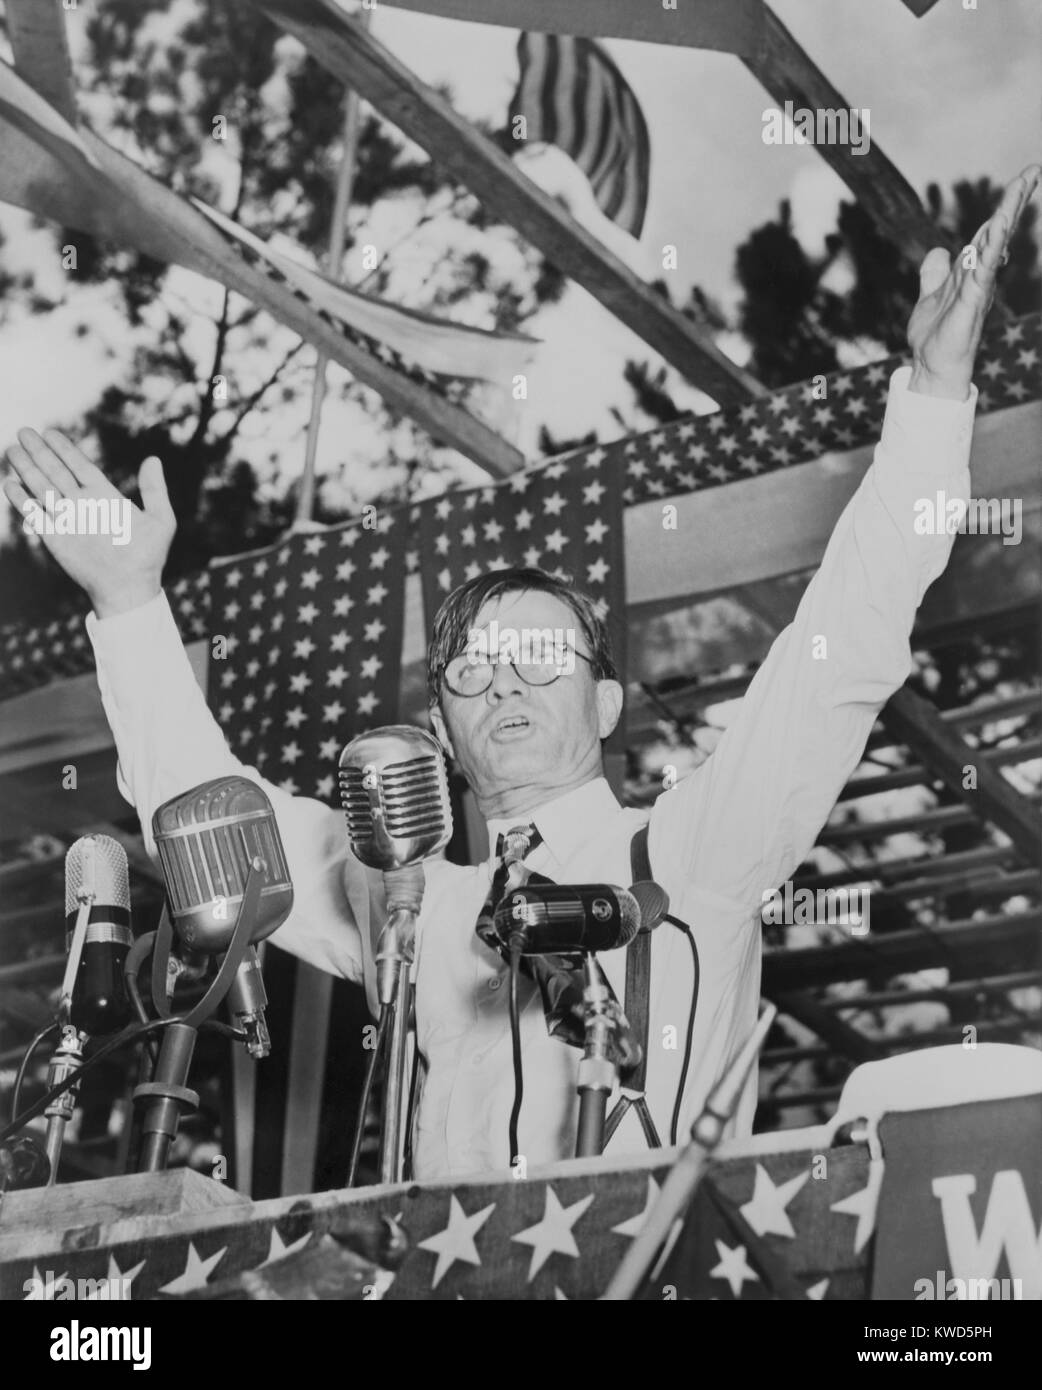 Eugene Talmadge, announcing that he is going to seek another term as governor of Georgia in 1942. His extreme racist and segregationist politics caused his defeat in the election to the more moderate Ellis Gibbs Arnall. (BSLOC 2014 13 52) Stock Photo